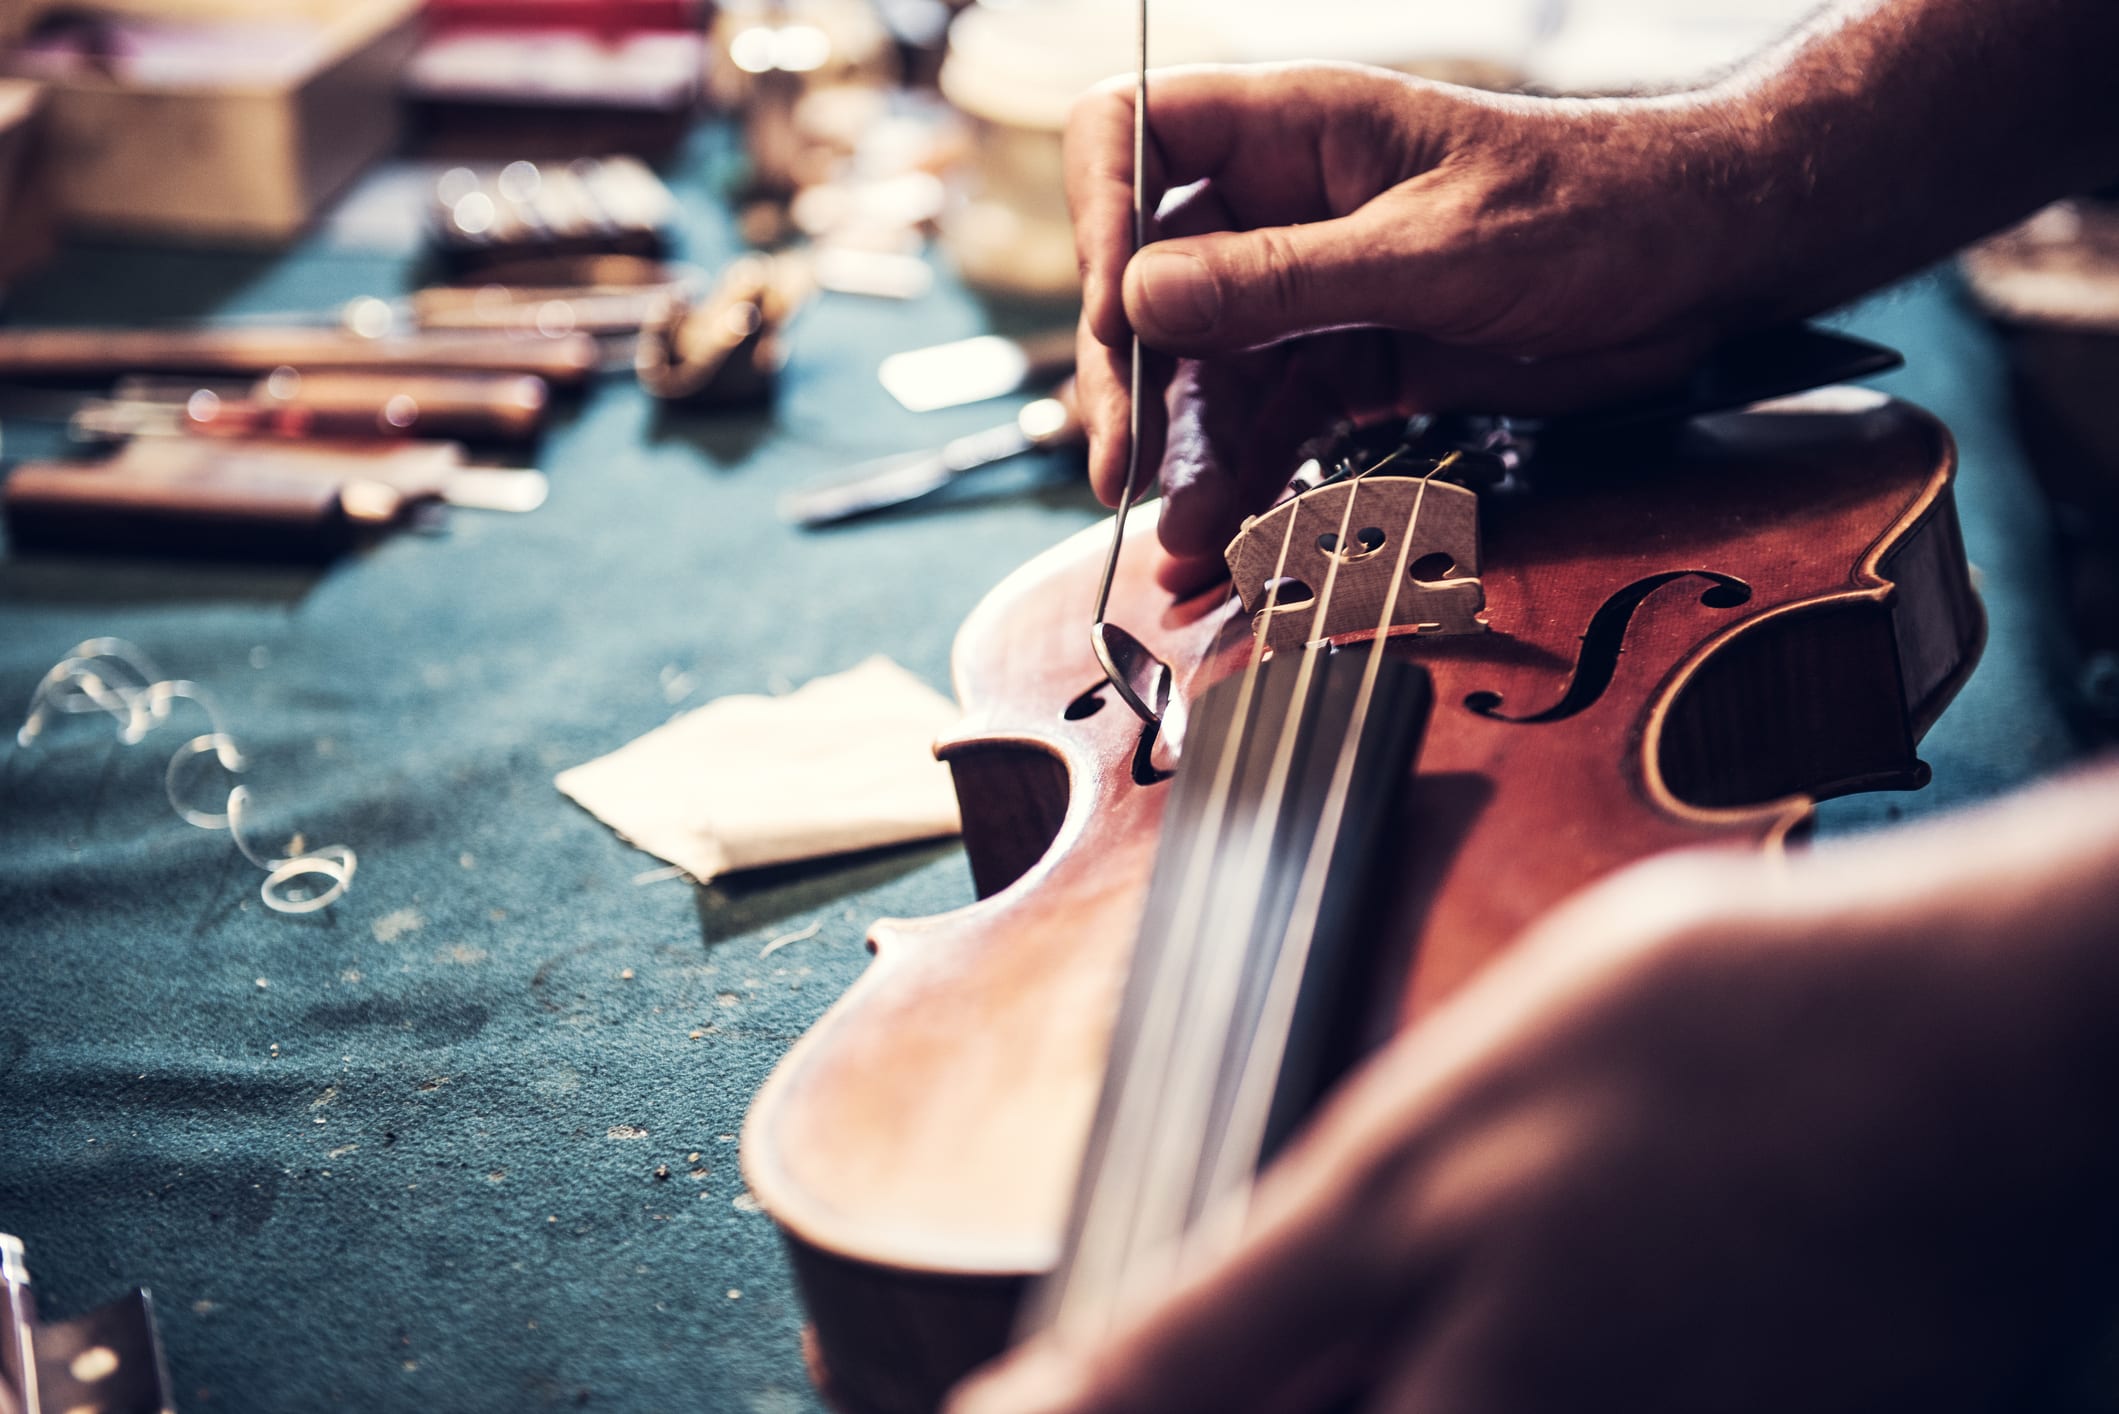 Portrait of senior entrepreneur working in his instrument repair shop, taking care of violins and other music instruments. Experienced senior is using his skills to repair instruments